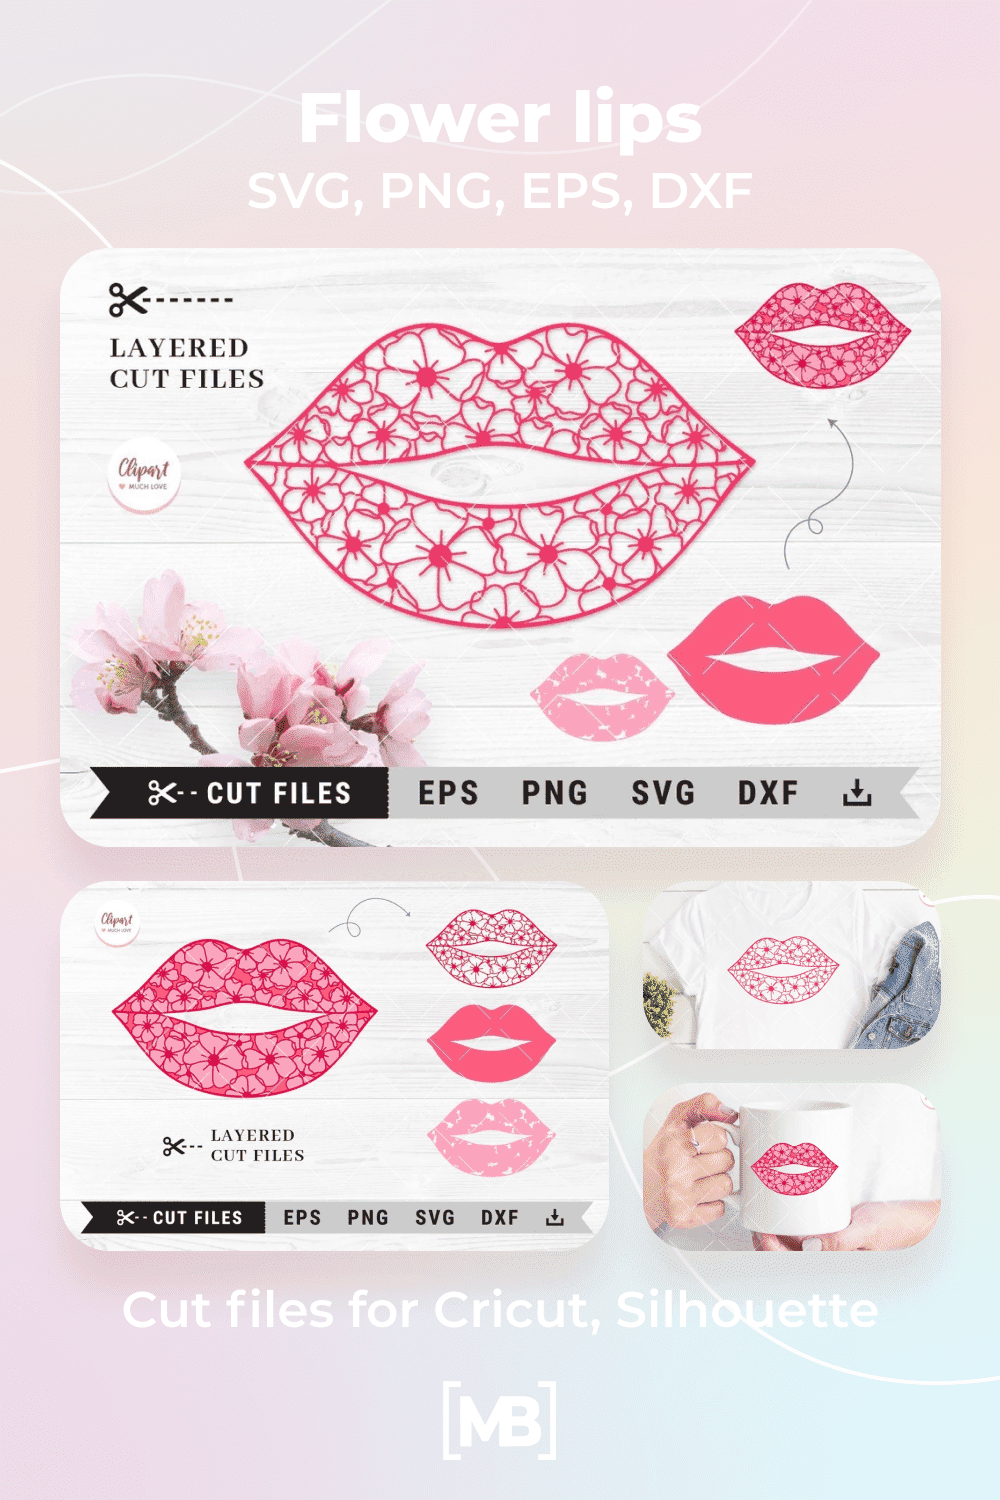 Flower lips SVG, PNG, EPS, DXF cut files for Cricut, Silhouette